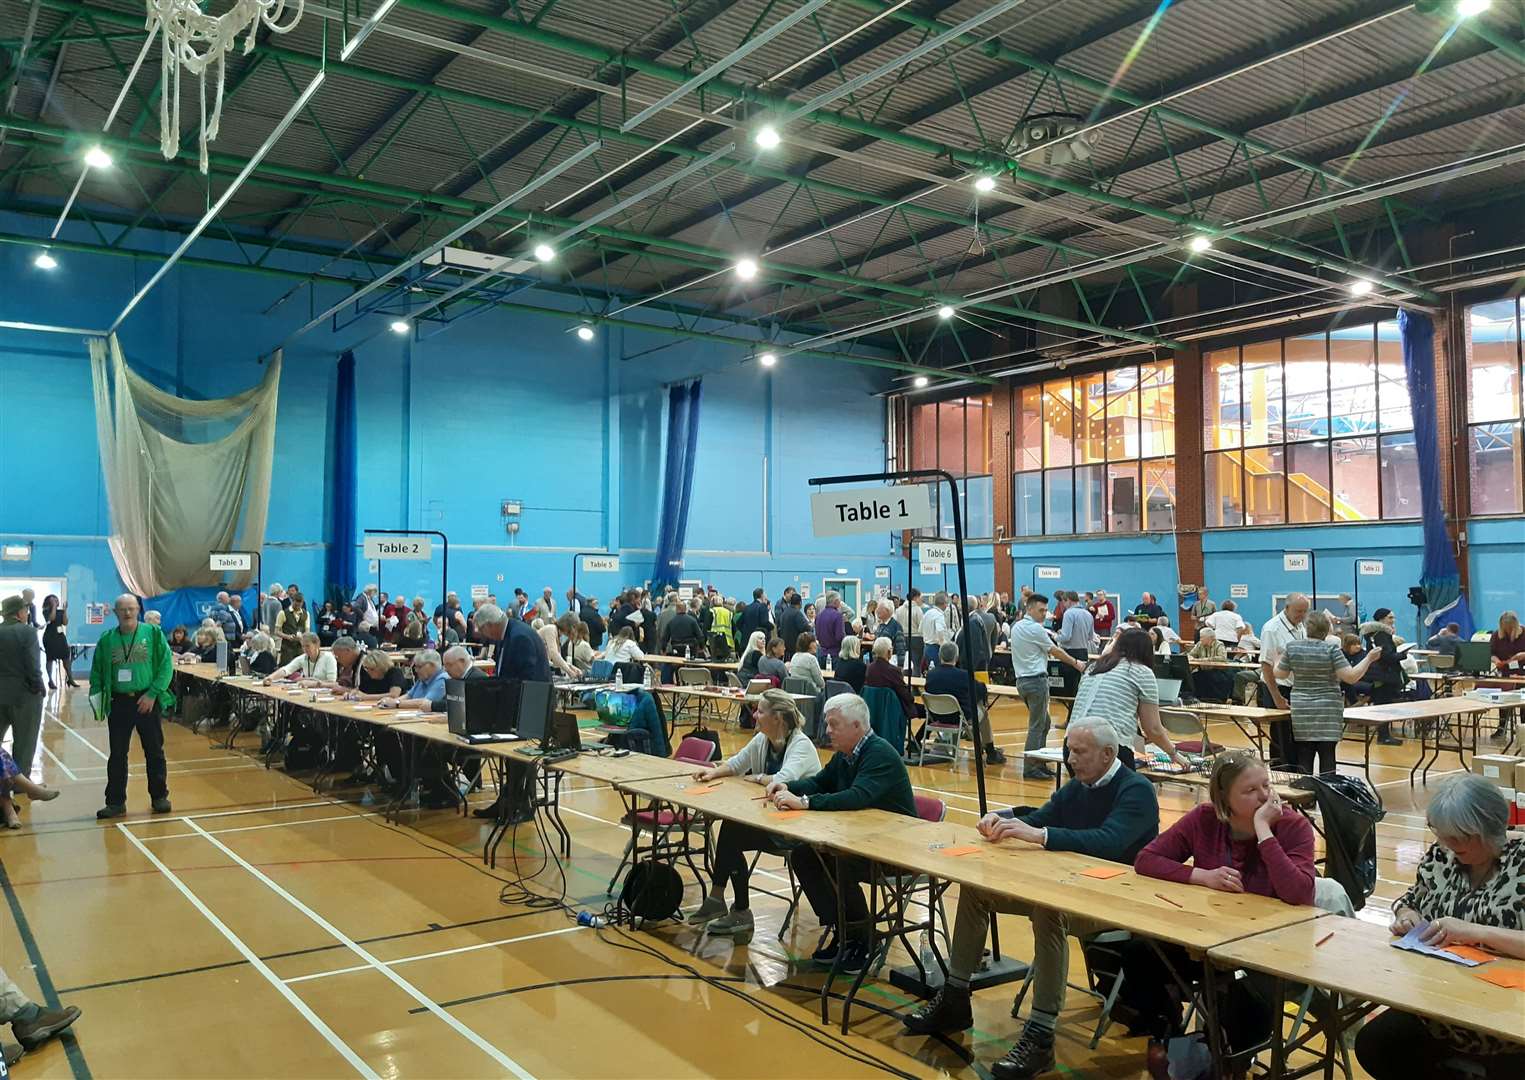 The Tonbridge and Malling Borough Council count was underway at Larkfield Leisure Centre in Aylesford